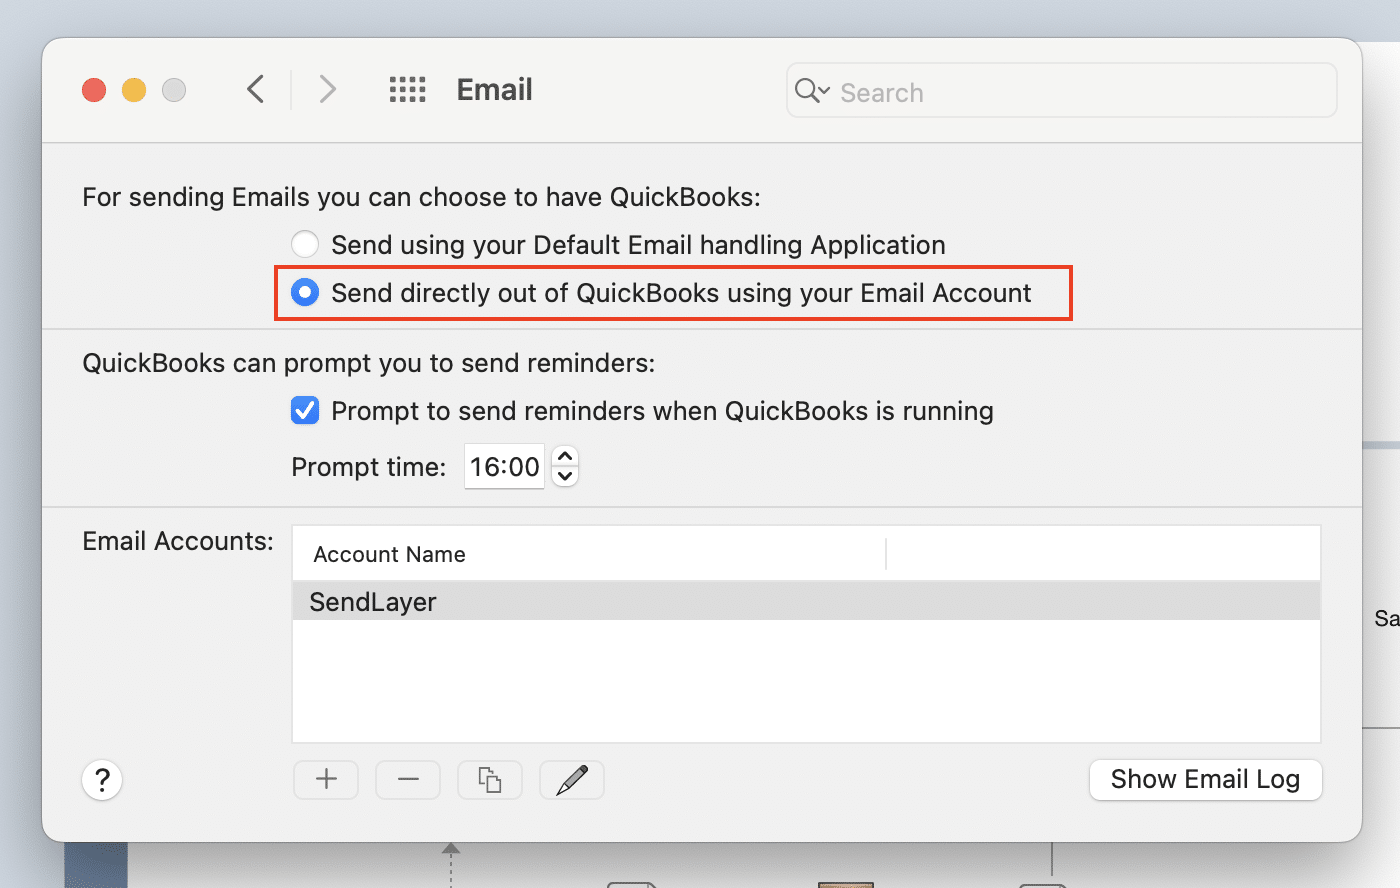 Send email directly from QuickBooks